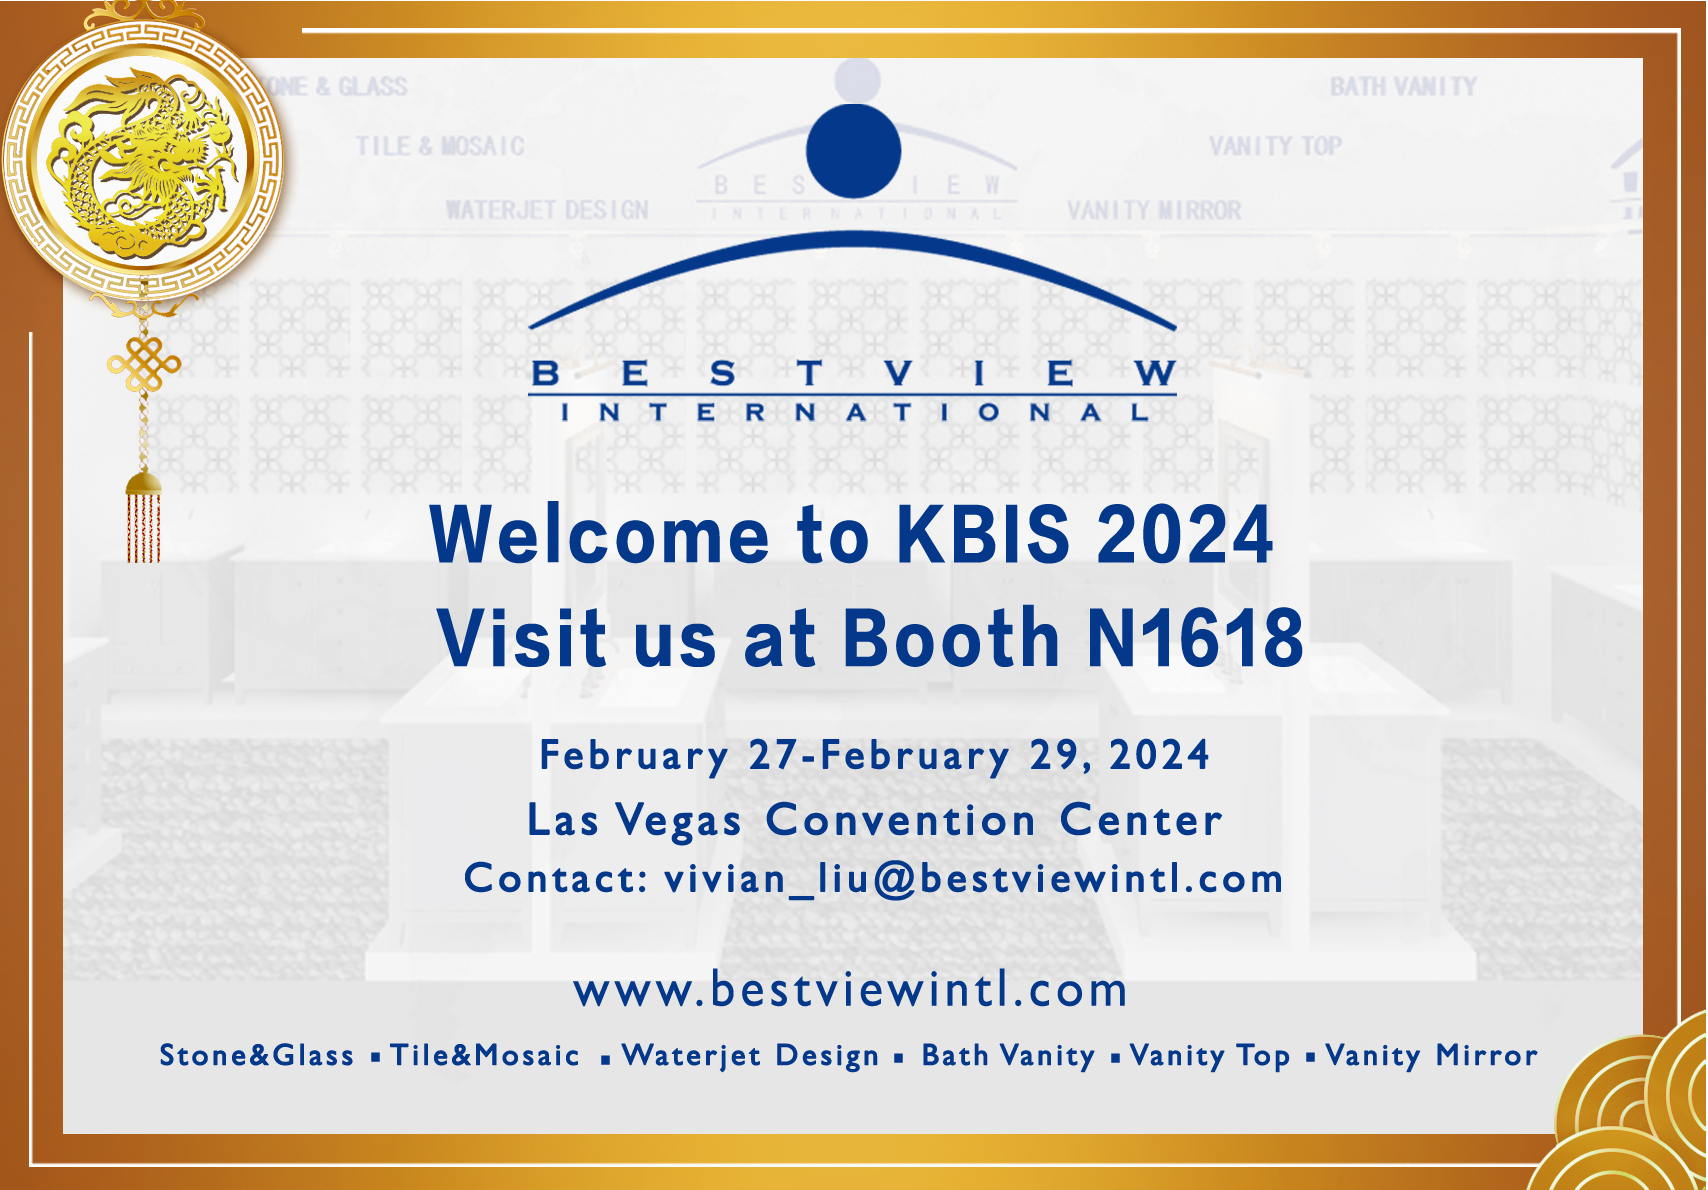  KBIS 2024 in Las Vegas Convention Center at Booth N1618